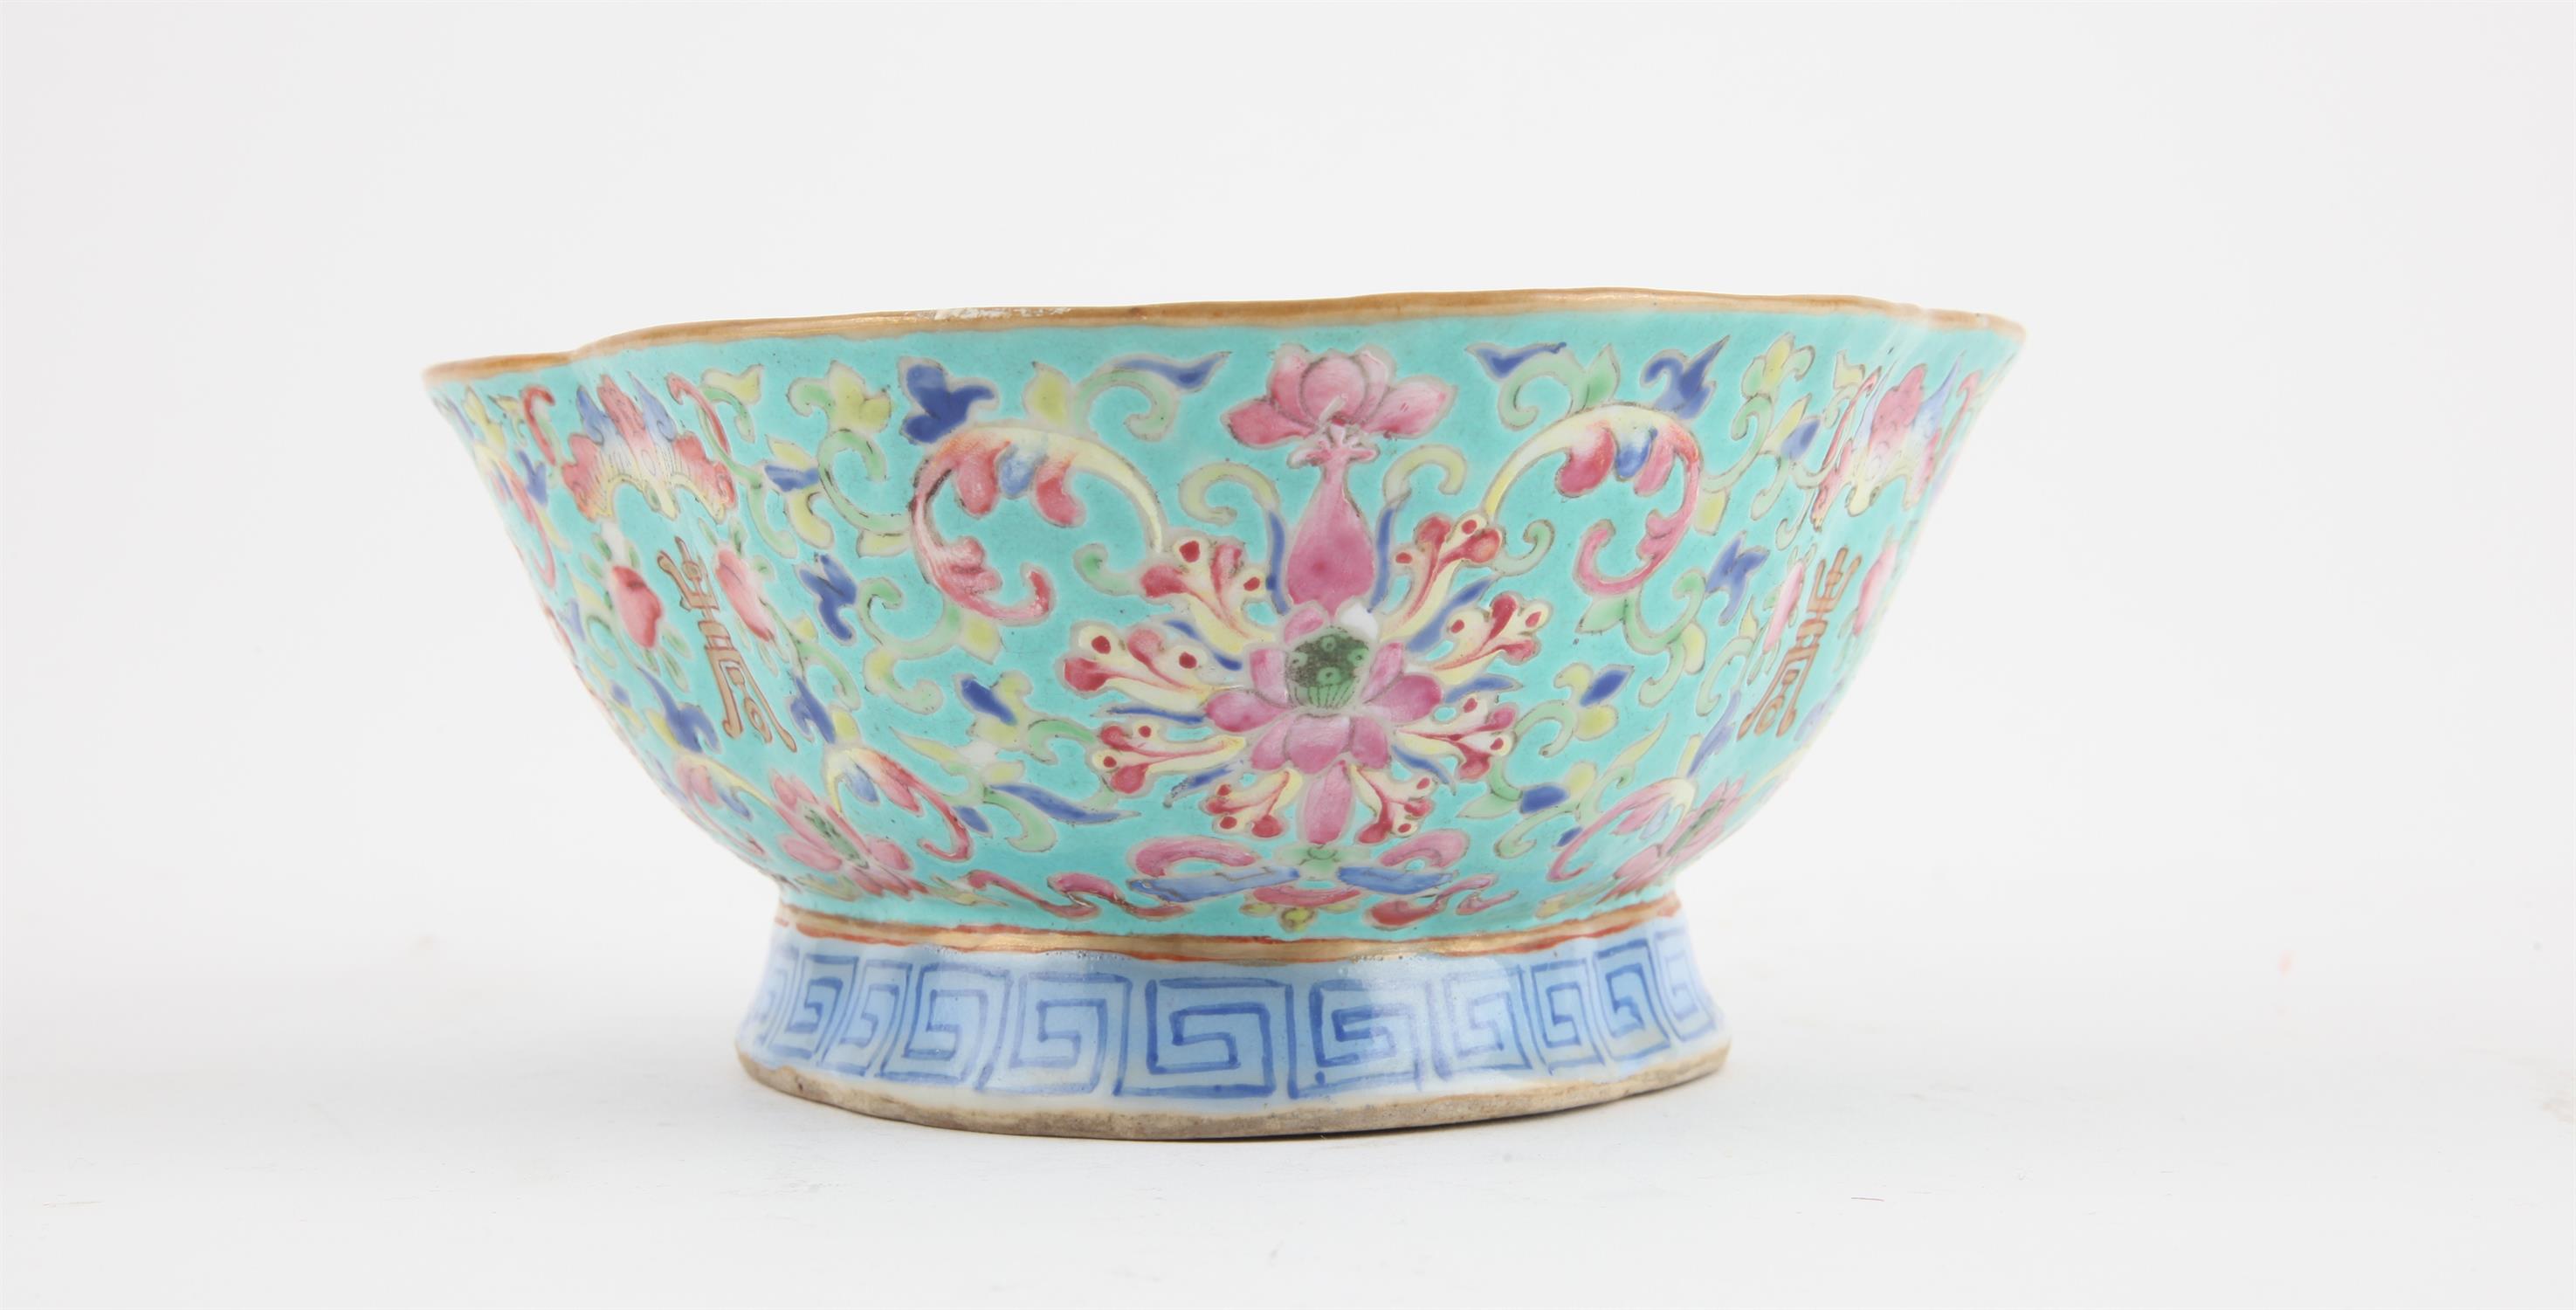 A Chinese Lobed Pedestal Bowl, Qing dynasty Painted with flowers , bats and the Shou longevity - Image 6 of 8